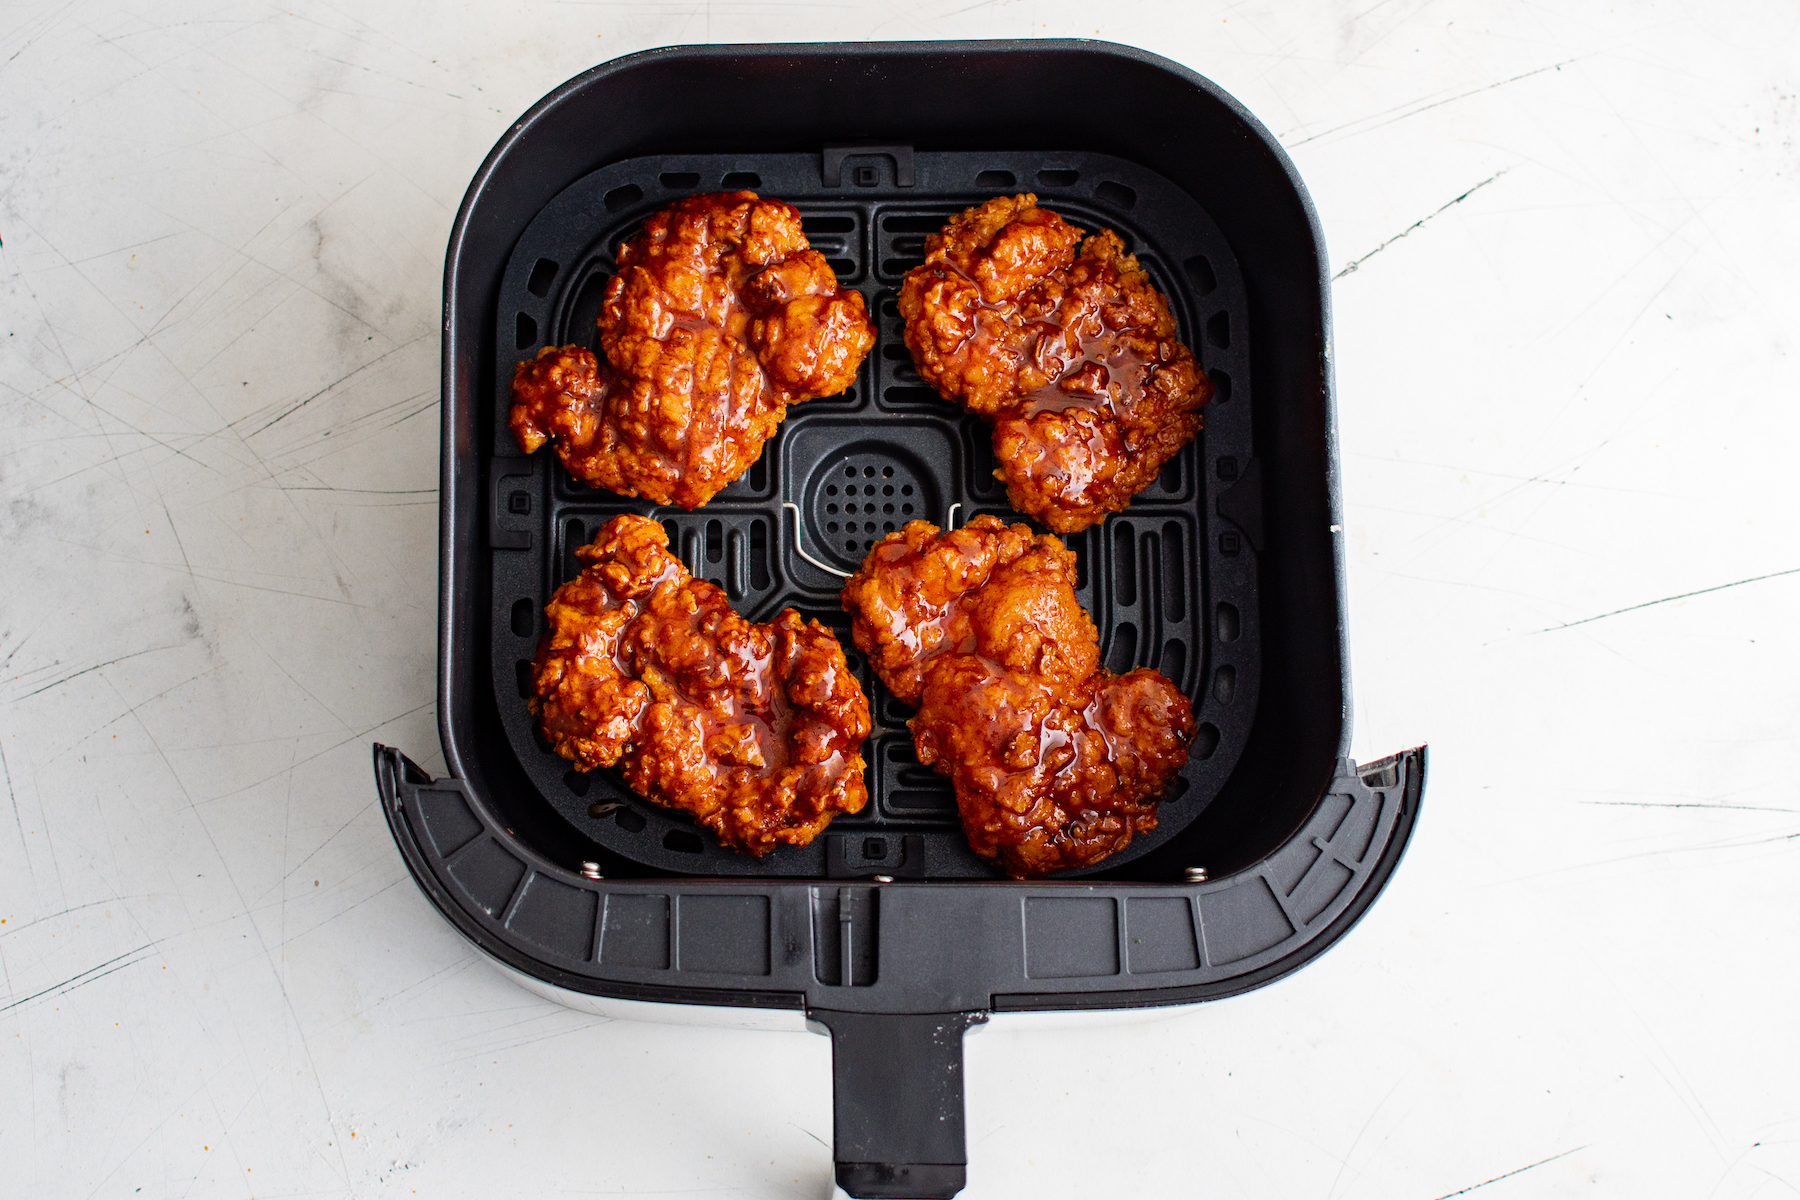 the completed air fryer nashville hot chicken recipe